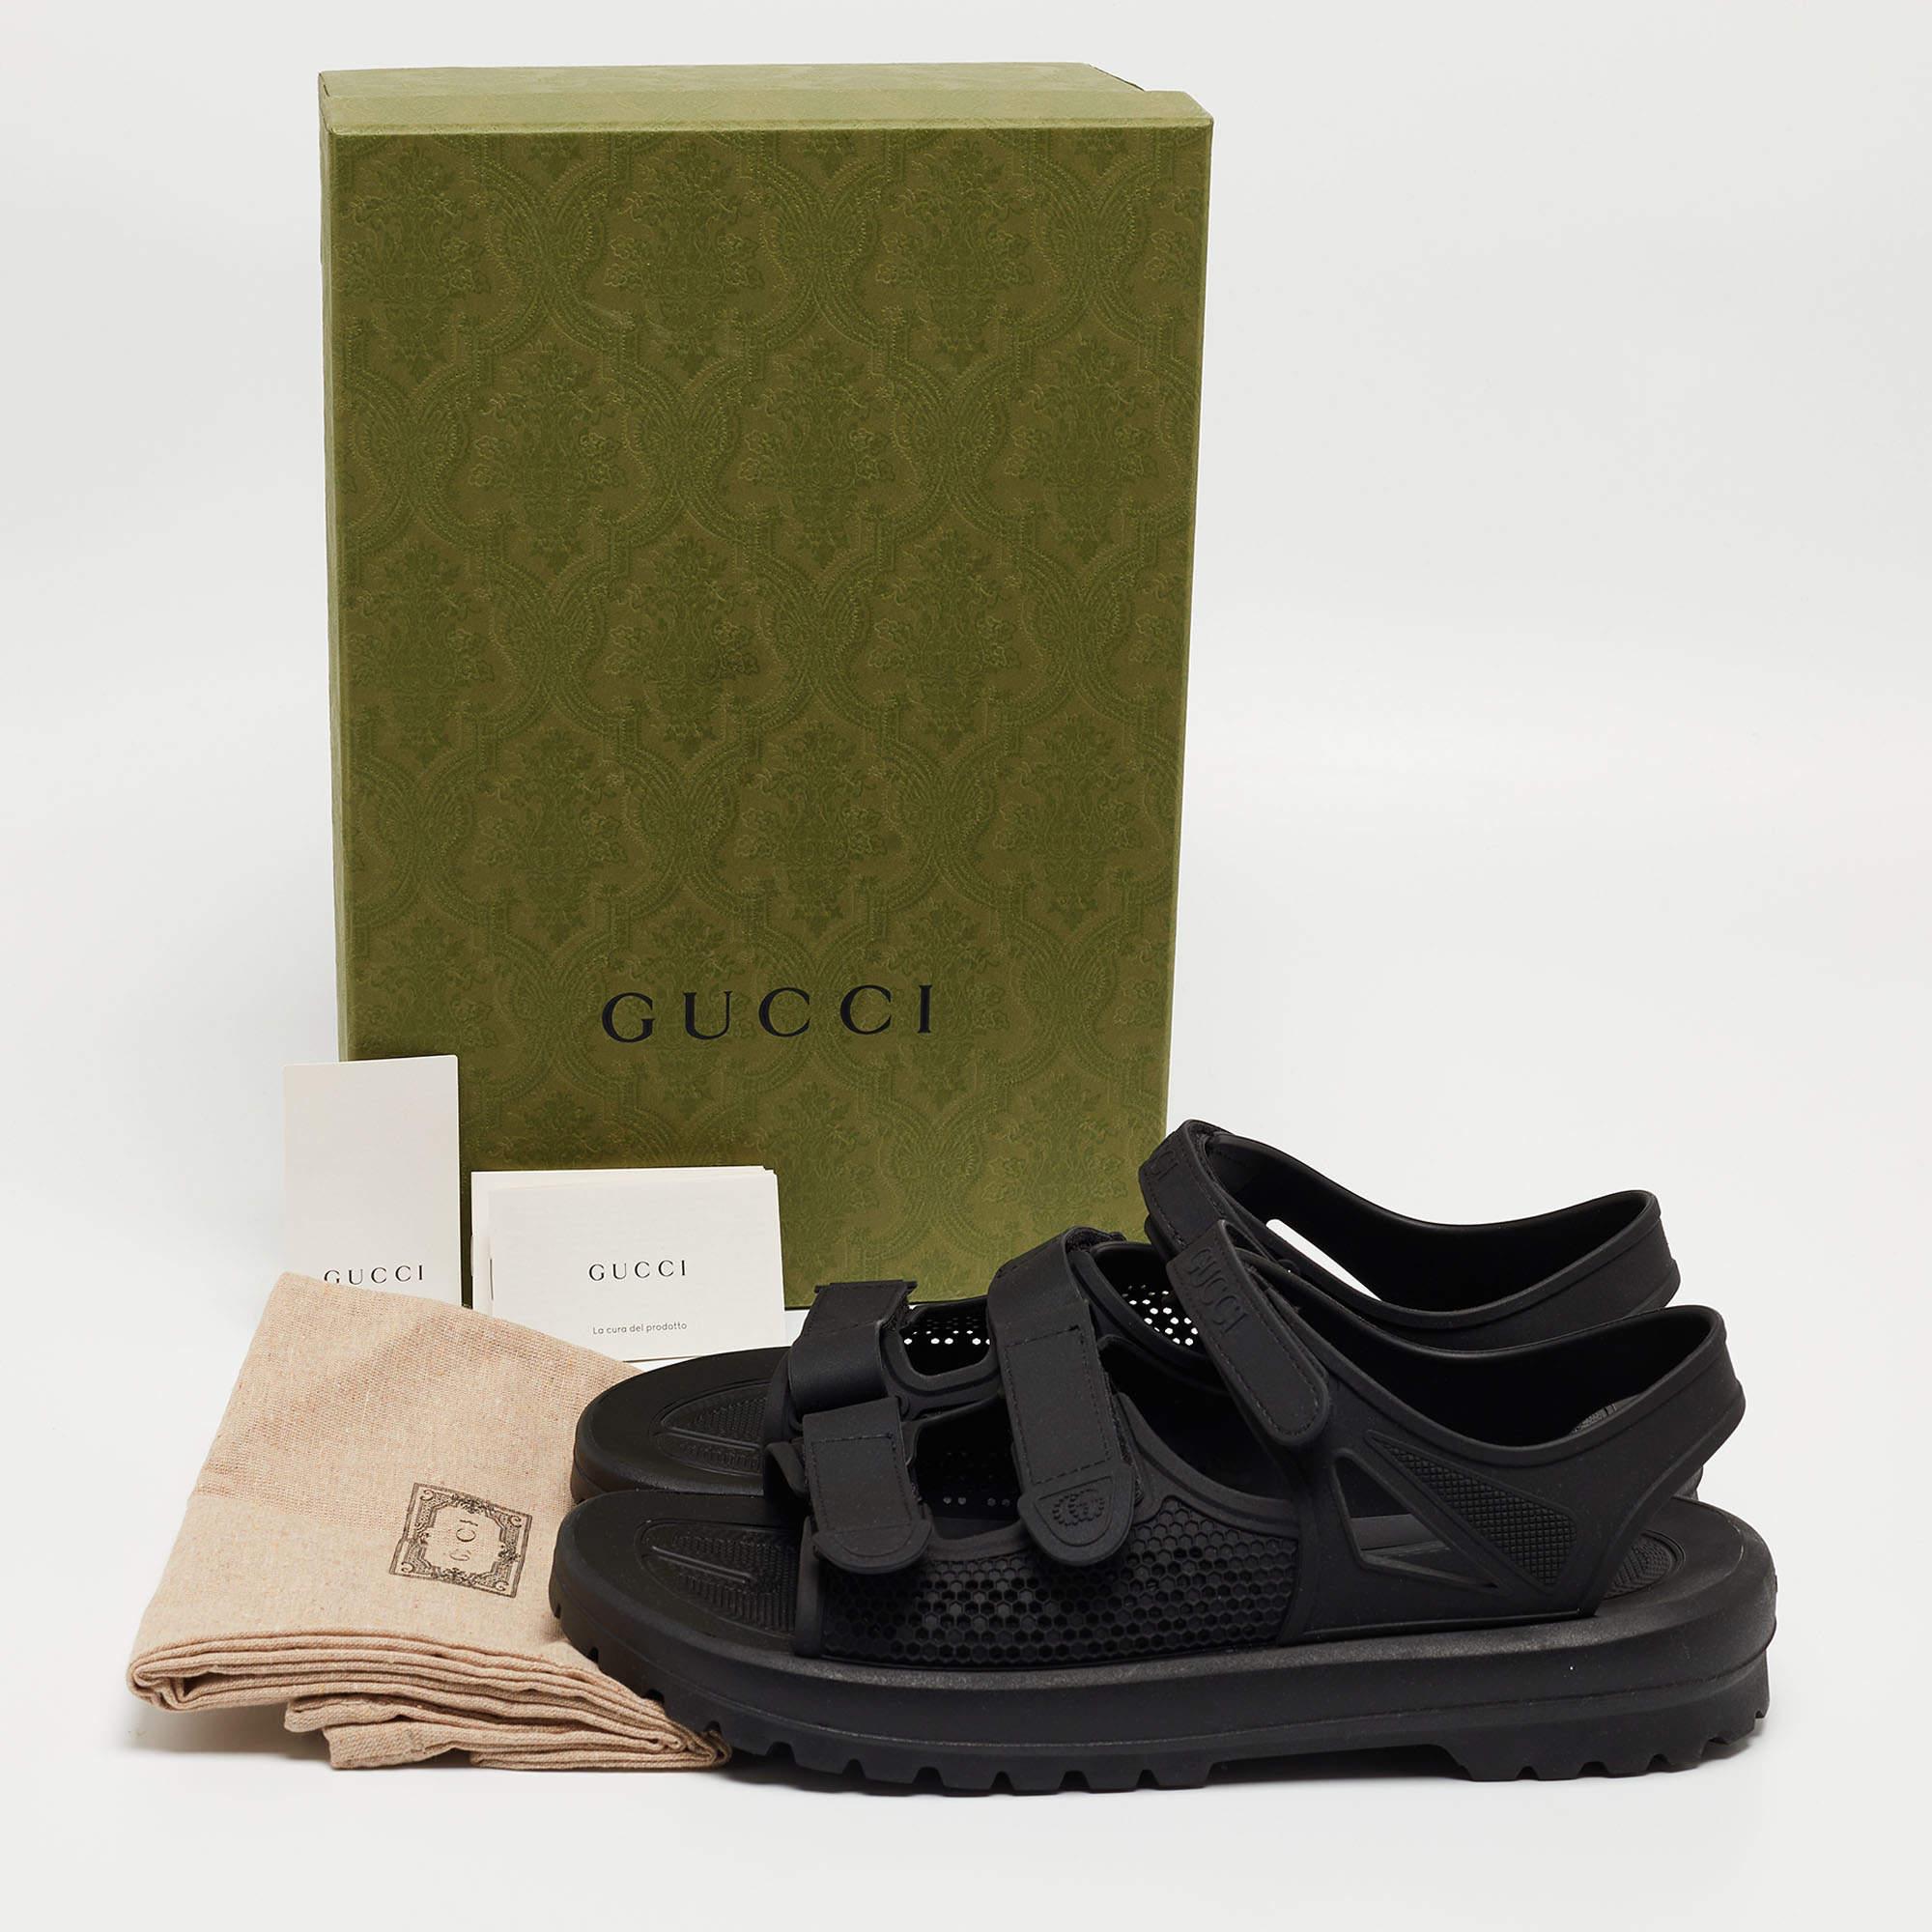 Gucci Black Honeycomb Rubber Flat Sandals Size 44 For Sale 5